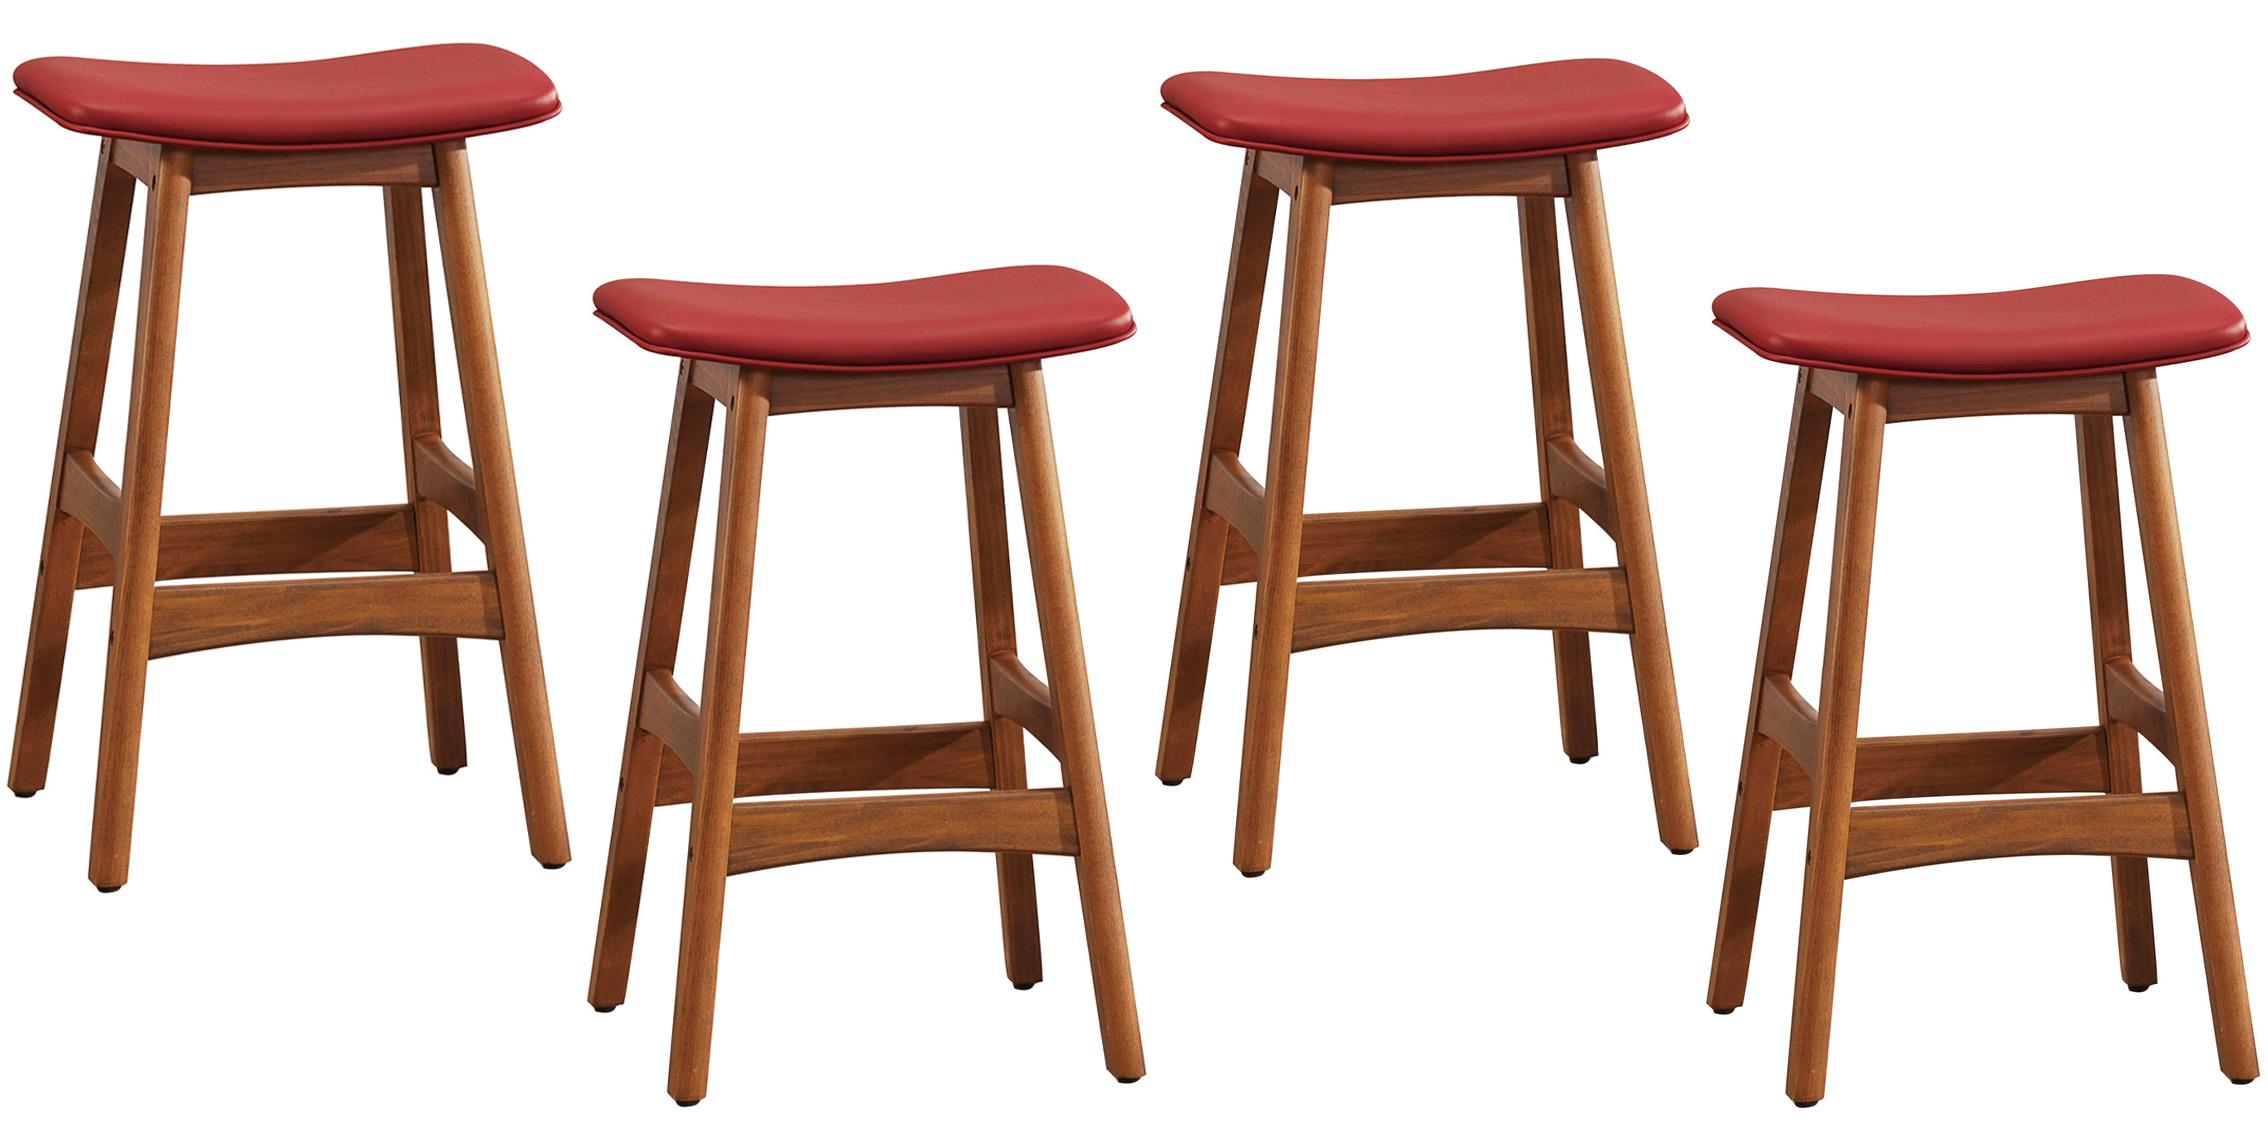 Modern, Casual Bar Stool Set RIDE 1188RD-24-Set-2 in Walnut, Red Faux Leather